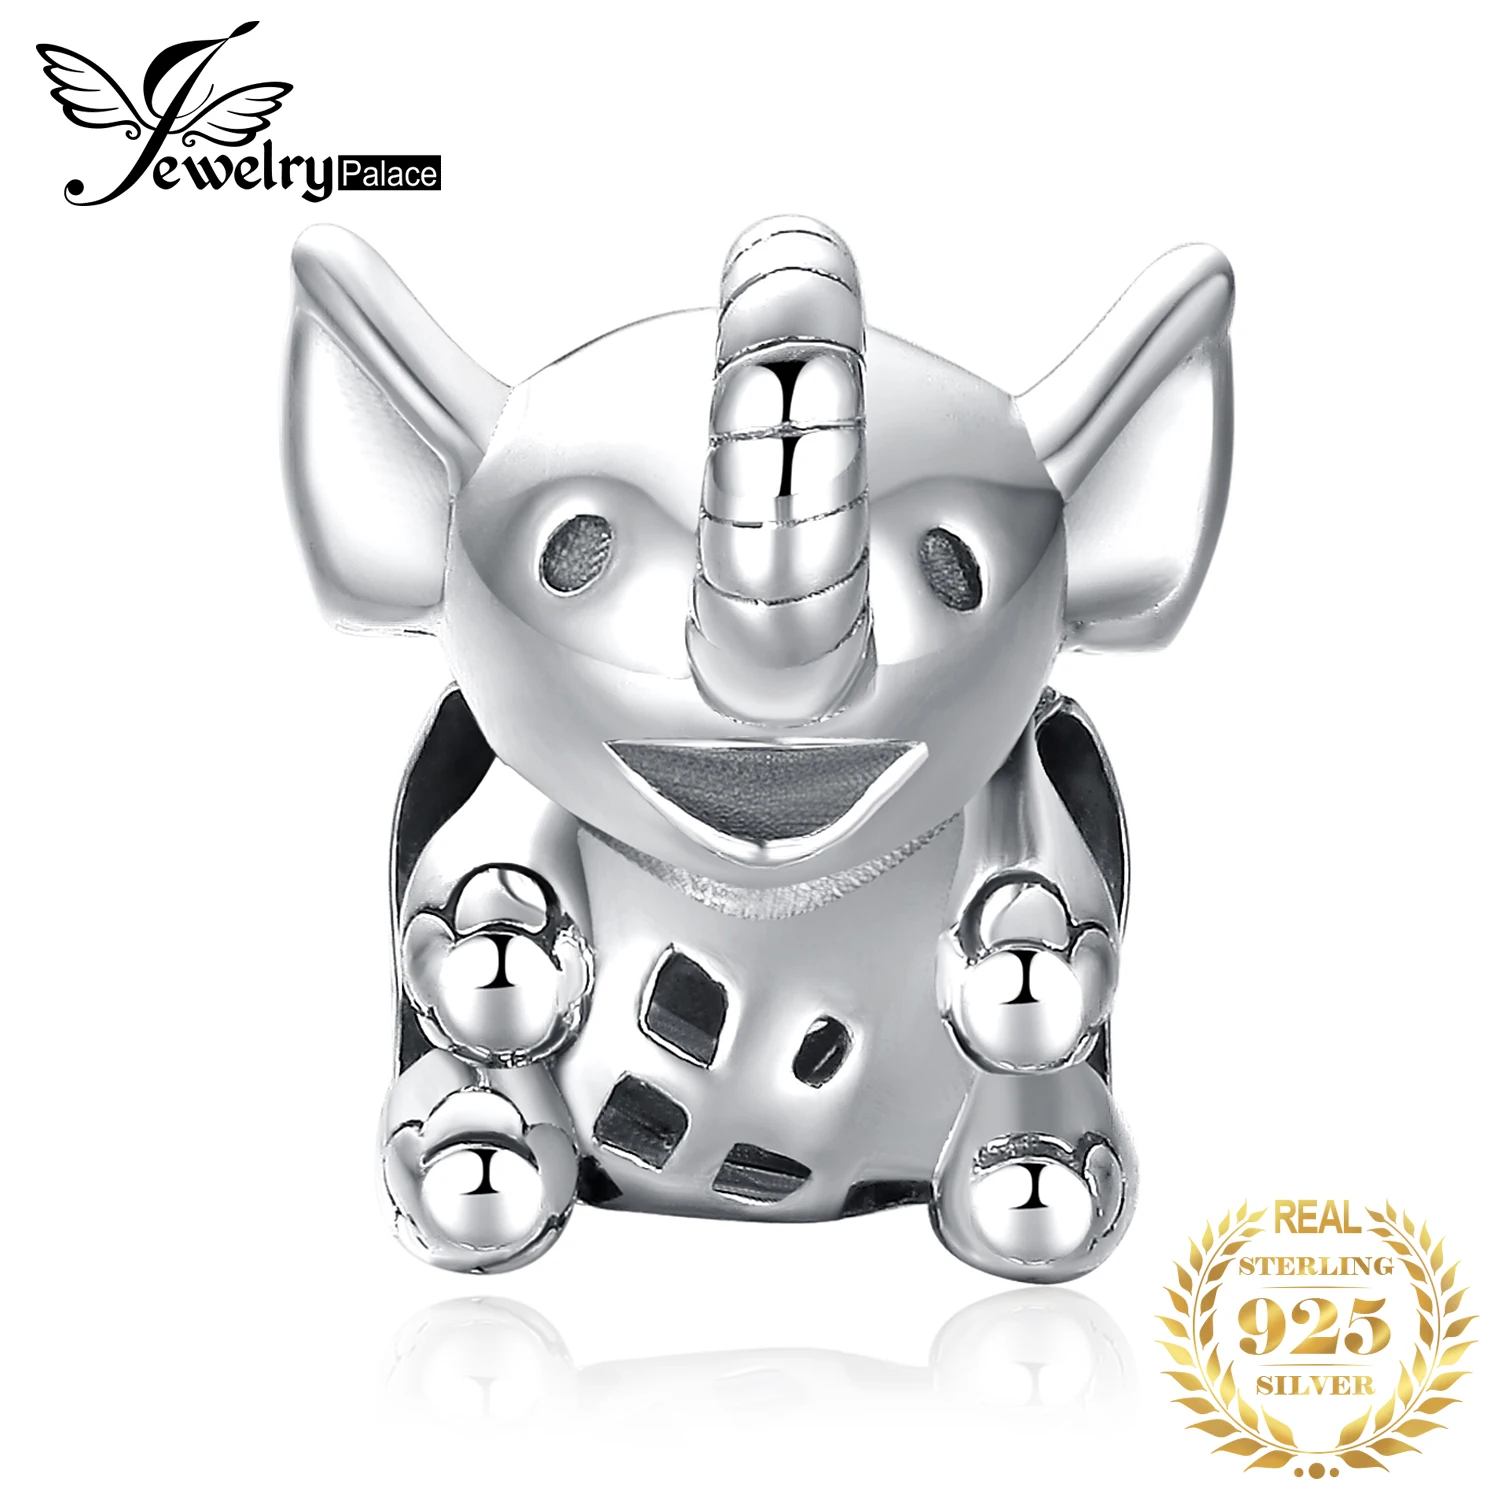 

JewelryPalace Elephant 925 Sterling Silver Beads Charms Silver 925 Original For Bracelet Silver 925 original For Jewelry Making